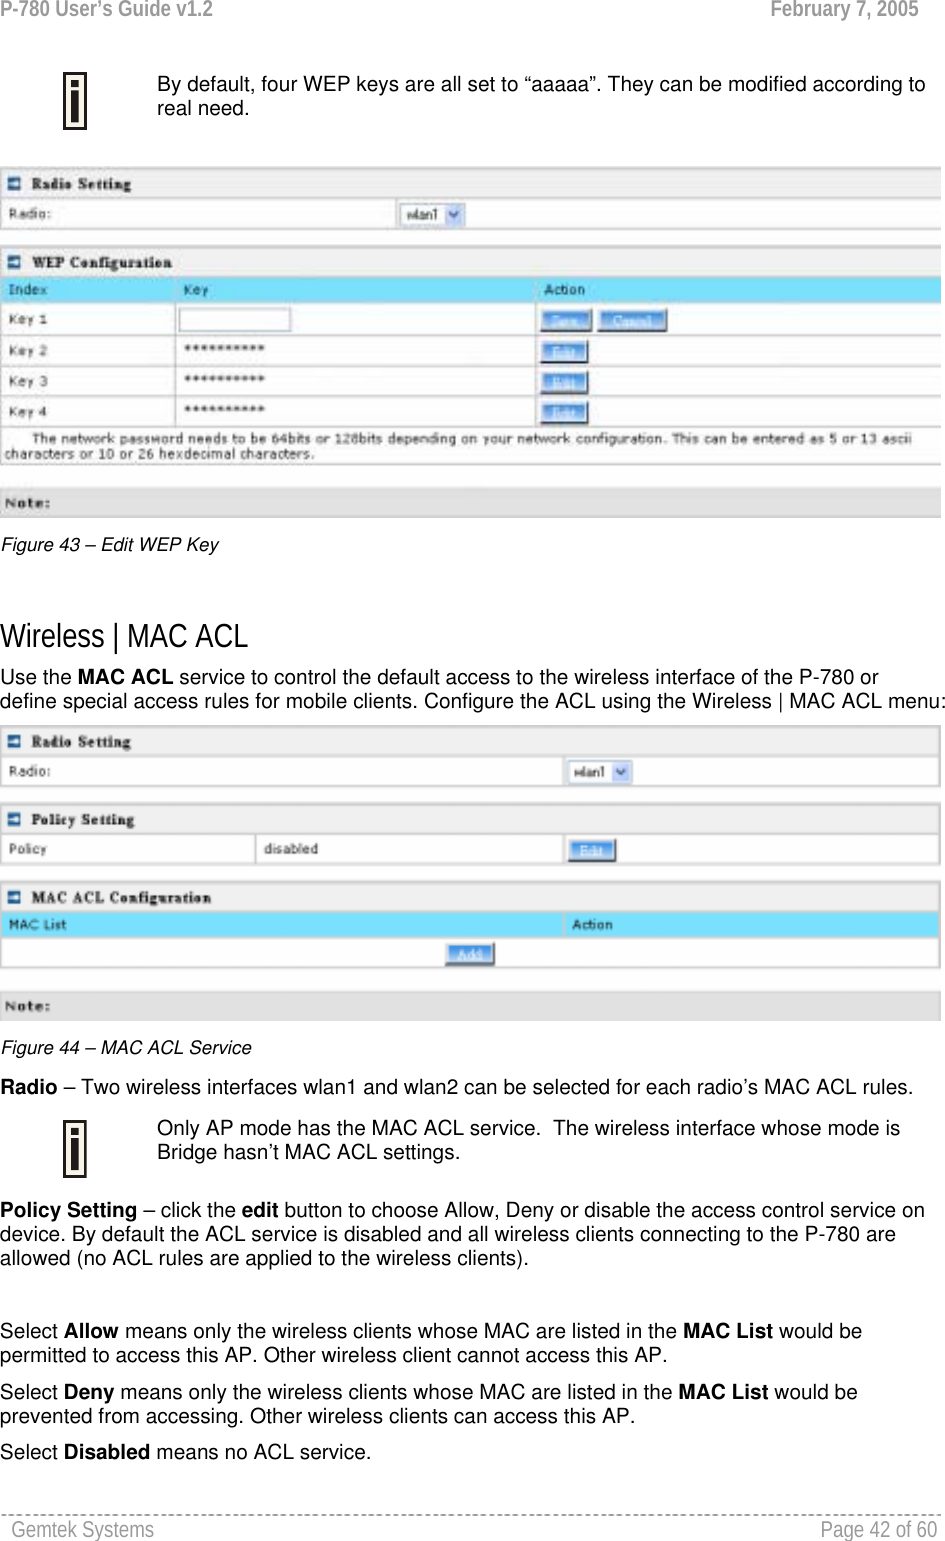 P-780 User’s Guide v1.2  February 7, 2005 Gemtek Systems    Page 42 of 60    By default, four WEP keys are all set to “aaaaa”. They can be modified according to real need.    Figure 43 – Edit WEP Key  Wireless | MAC ACL Use the MAC ACL service to control the default access to the wireless interface of the P-780 or define special access rules for mobile clients. Configure the ACL using the Wireless | MAC ACL menu:  Figure 44 – MAC ACL Service Radio – Two wireless interfaces wlan1 and wlan2 can be selected for each radio’s MAC ACL rules.   Only AP mode has the MAC ACL service.  The wireless interface whose mode is Bridge hasn’t MAC ACL settings. Policy Setting – click the edit button to choose Allow, Deny or disable the access control service on device. By default the ACL service is disabled and all wireless clients connecting to the P-780 are allowed (no ACL rules are applied to the wireless clients).  Select Allow means only the wireless clients whose MAC are listed in the MAC List would be permitted to access this AP. Other wireless client cannot access this AP. Select Deny means only the wireless clients whose MAC are listed in the MAC List would be prevented from accessing. Other wireless clients can access this AP.   Select Disabled means no ACL service.  